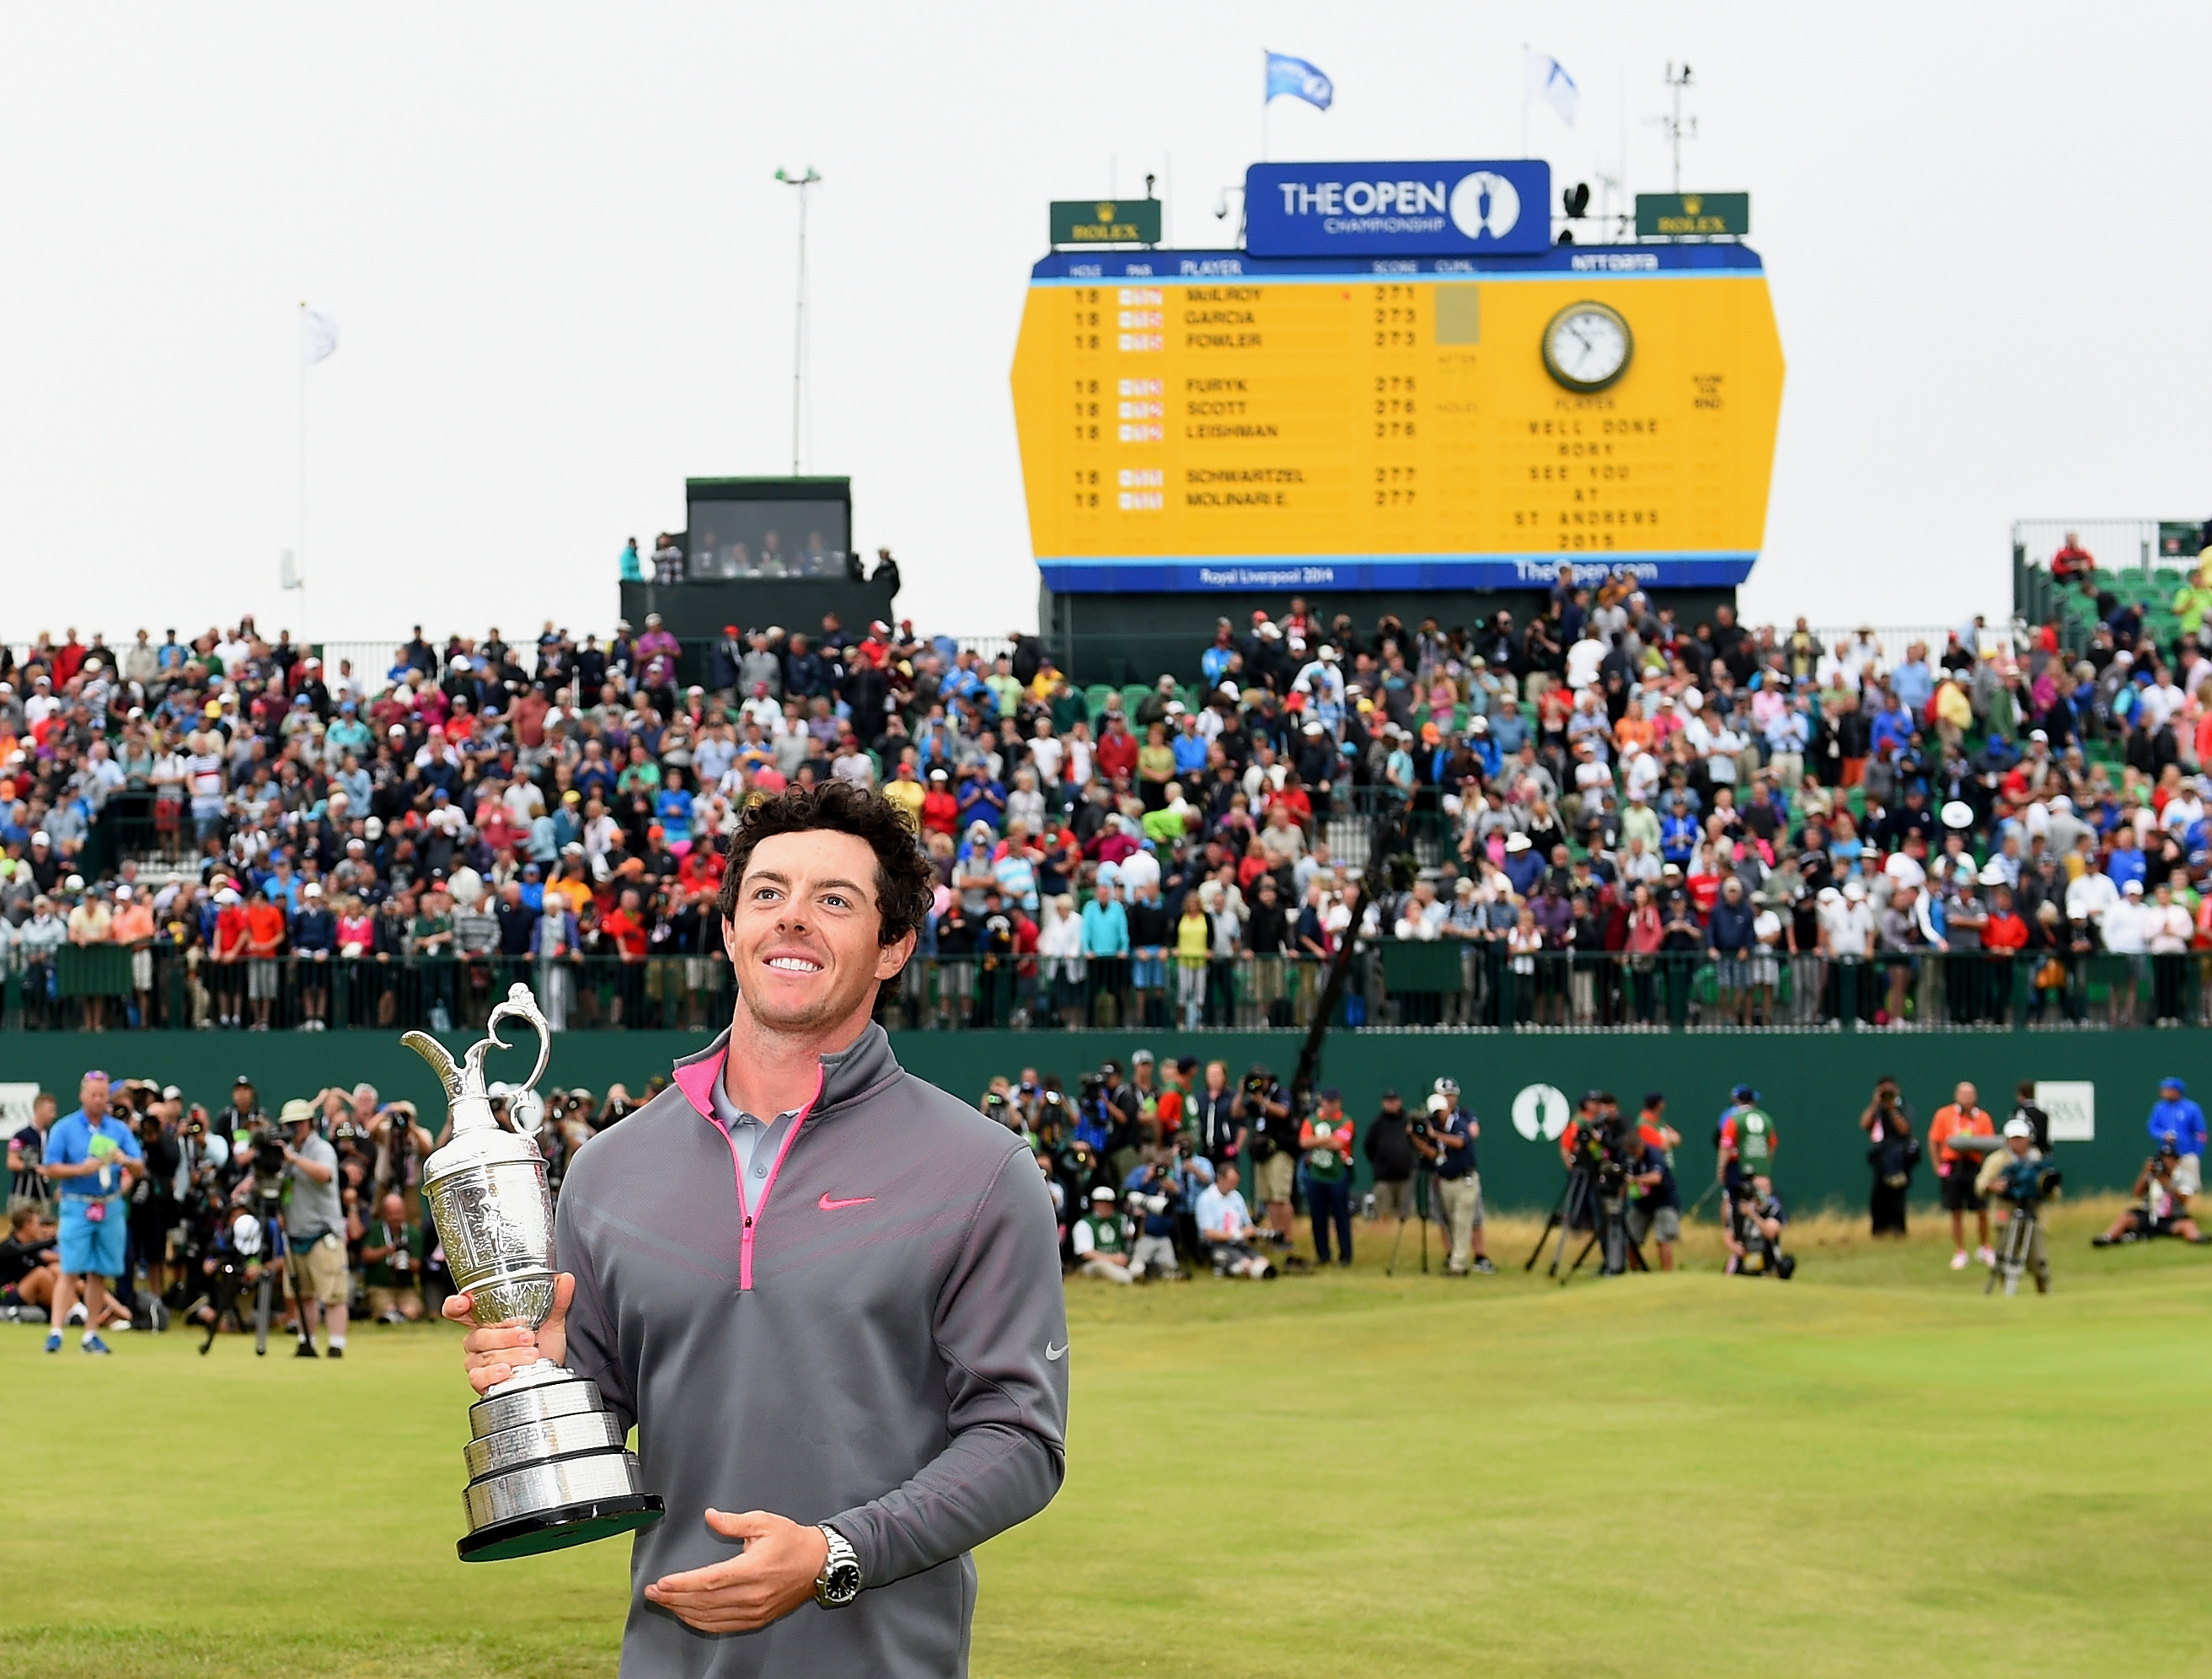 HOYLAKE, ENGLAND - JULY 20: Rory McIlroy of Northern Ireland celebrates with the Claret Jug after his two-stroke victory after the final round of The 143rd Open Championship at Royal Liverpool on July 20, 2014 in Hoylake, England. (Photo by Ross Kinnaird/R&A/R&A via Getty Images)